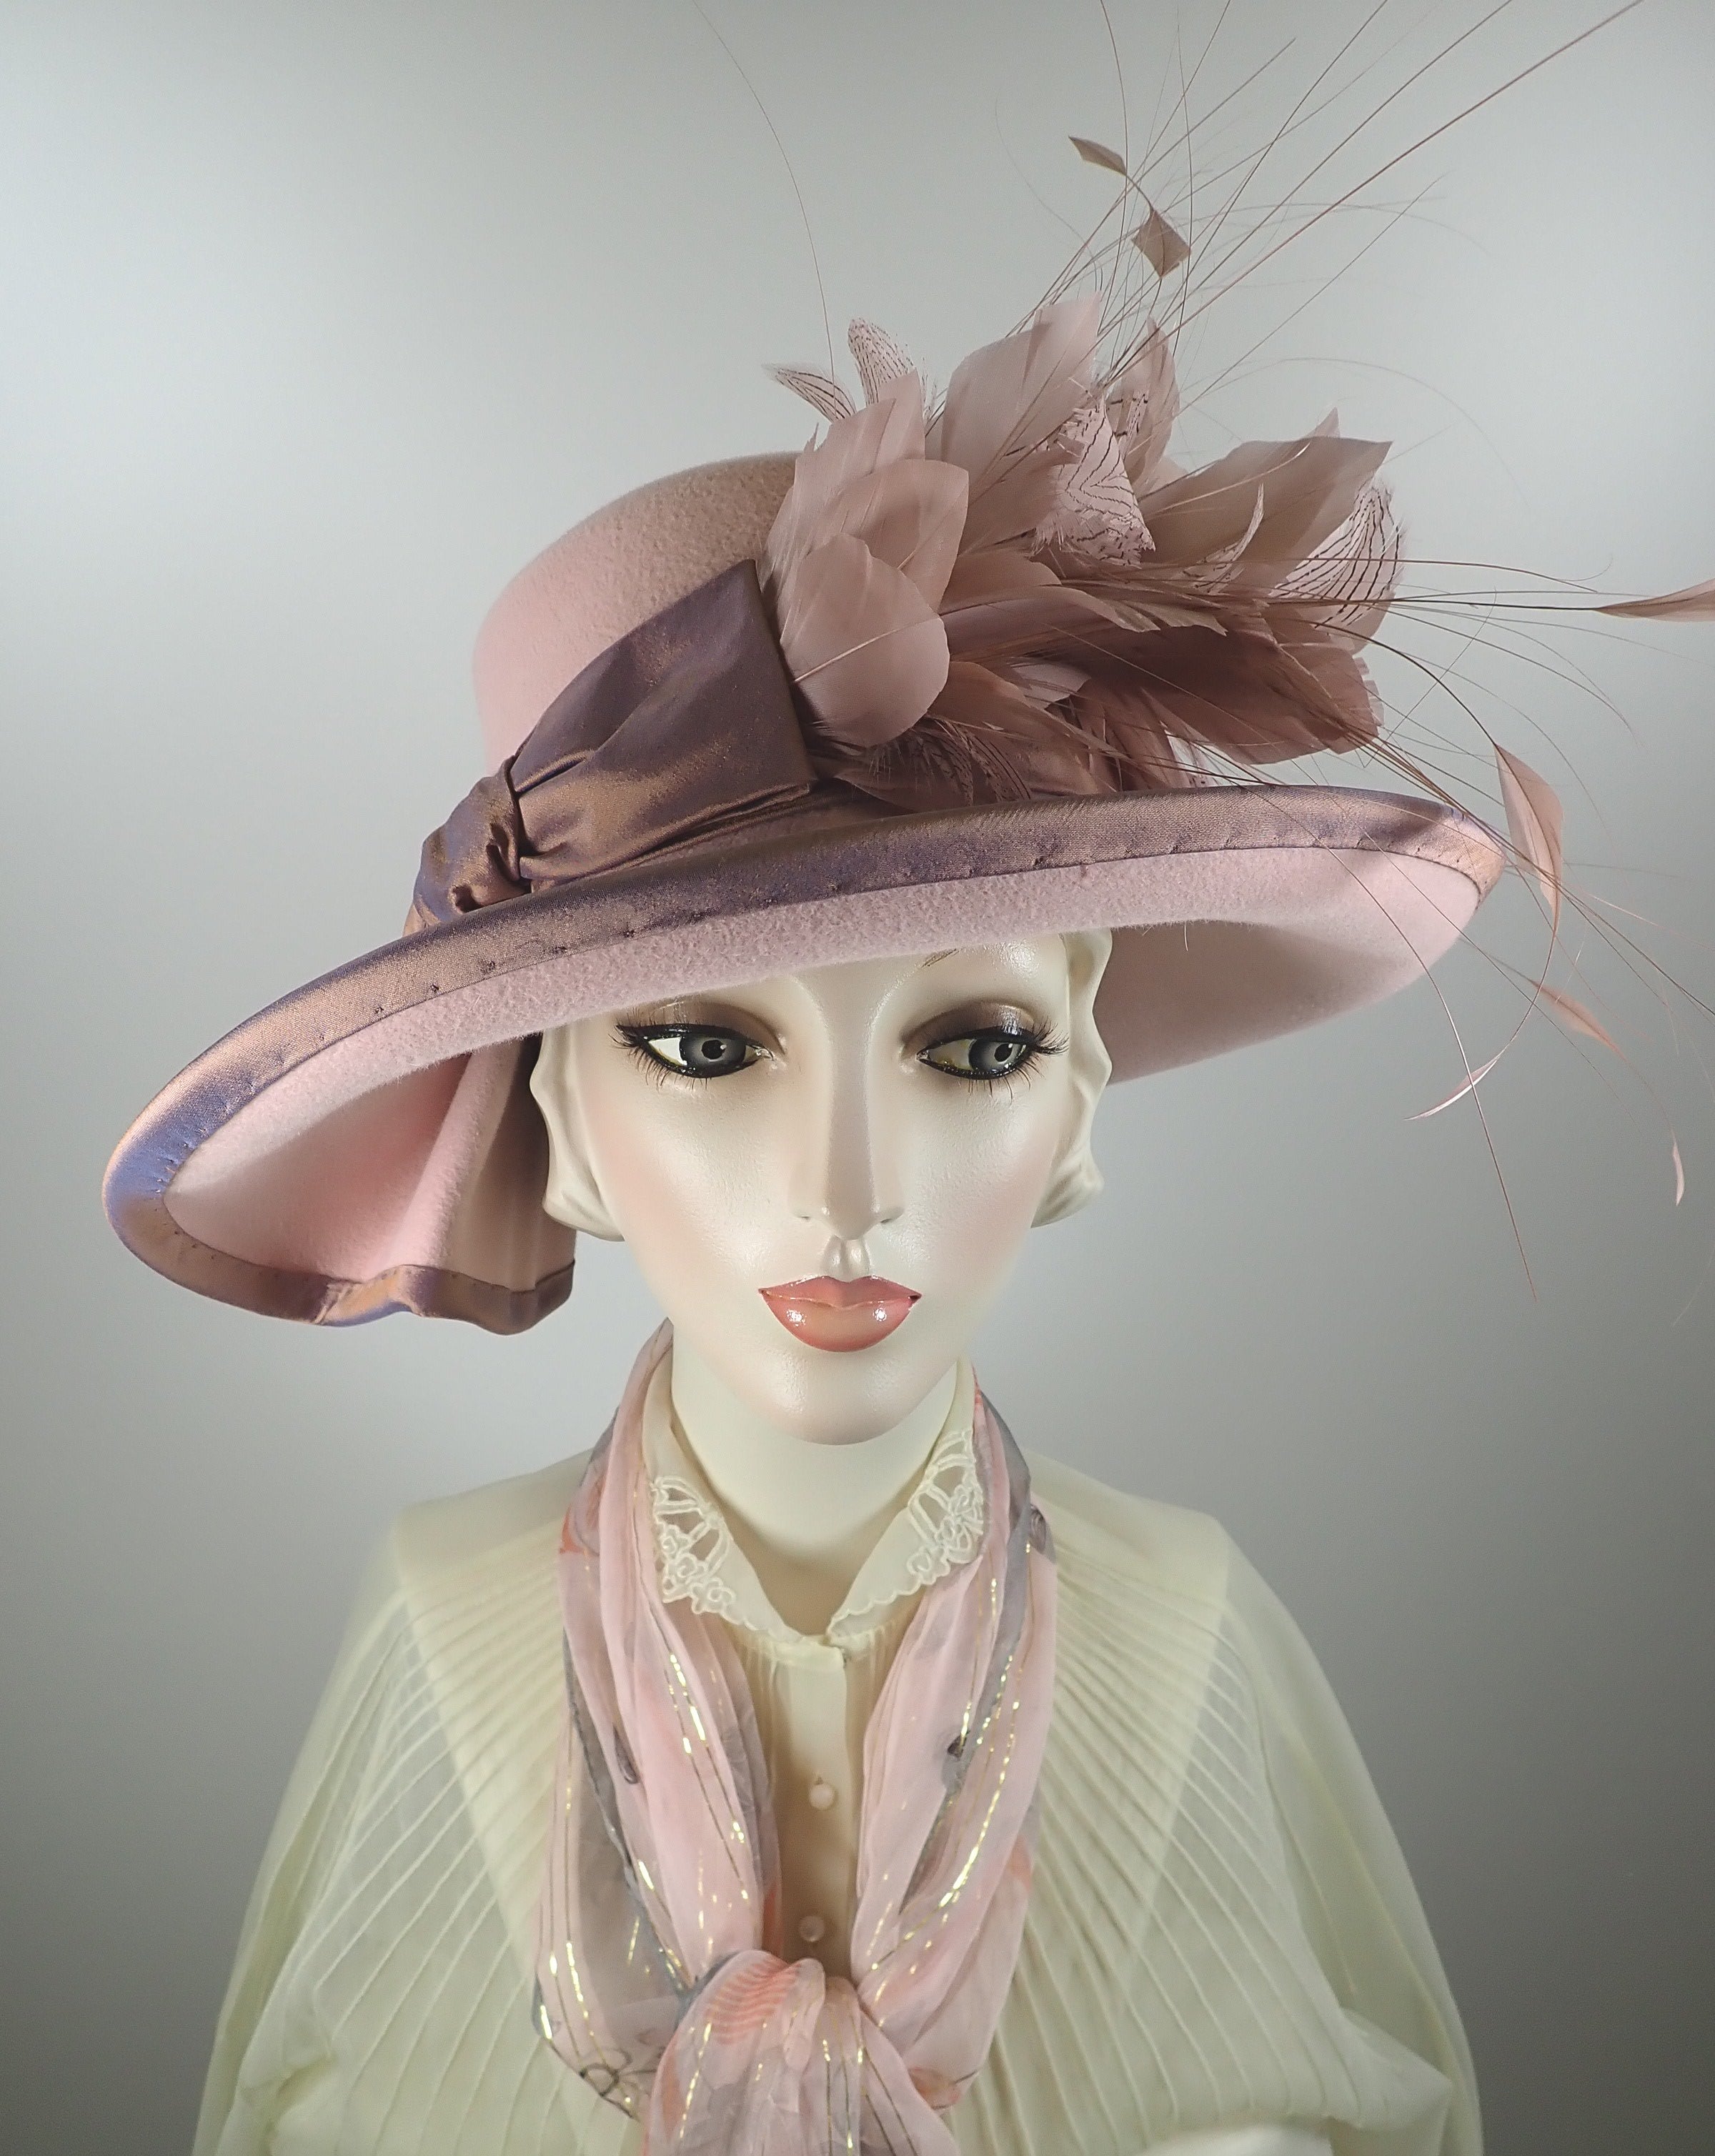 Dressy Pink Wide Brim Wool Felt Winter or Spring Hat – What a Great Hat